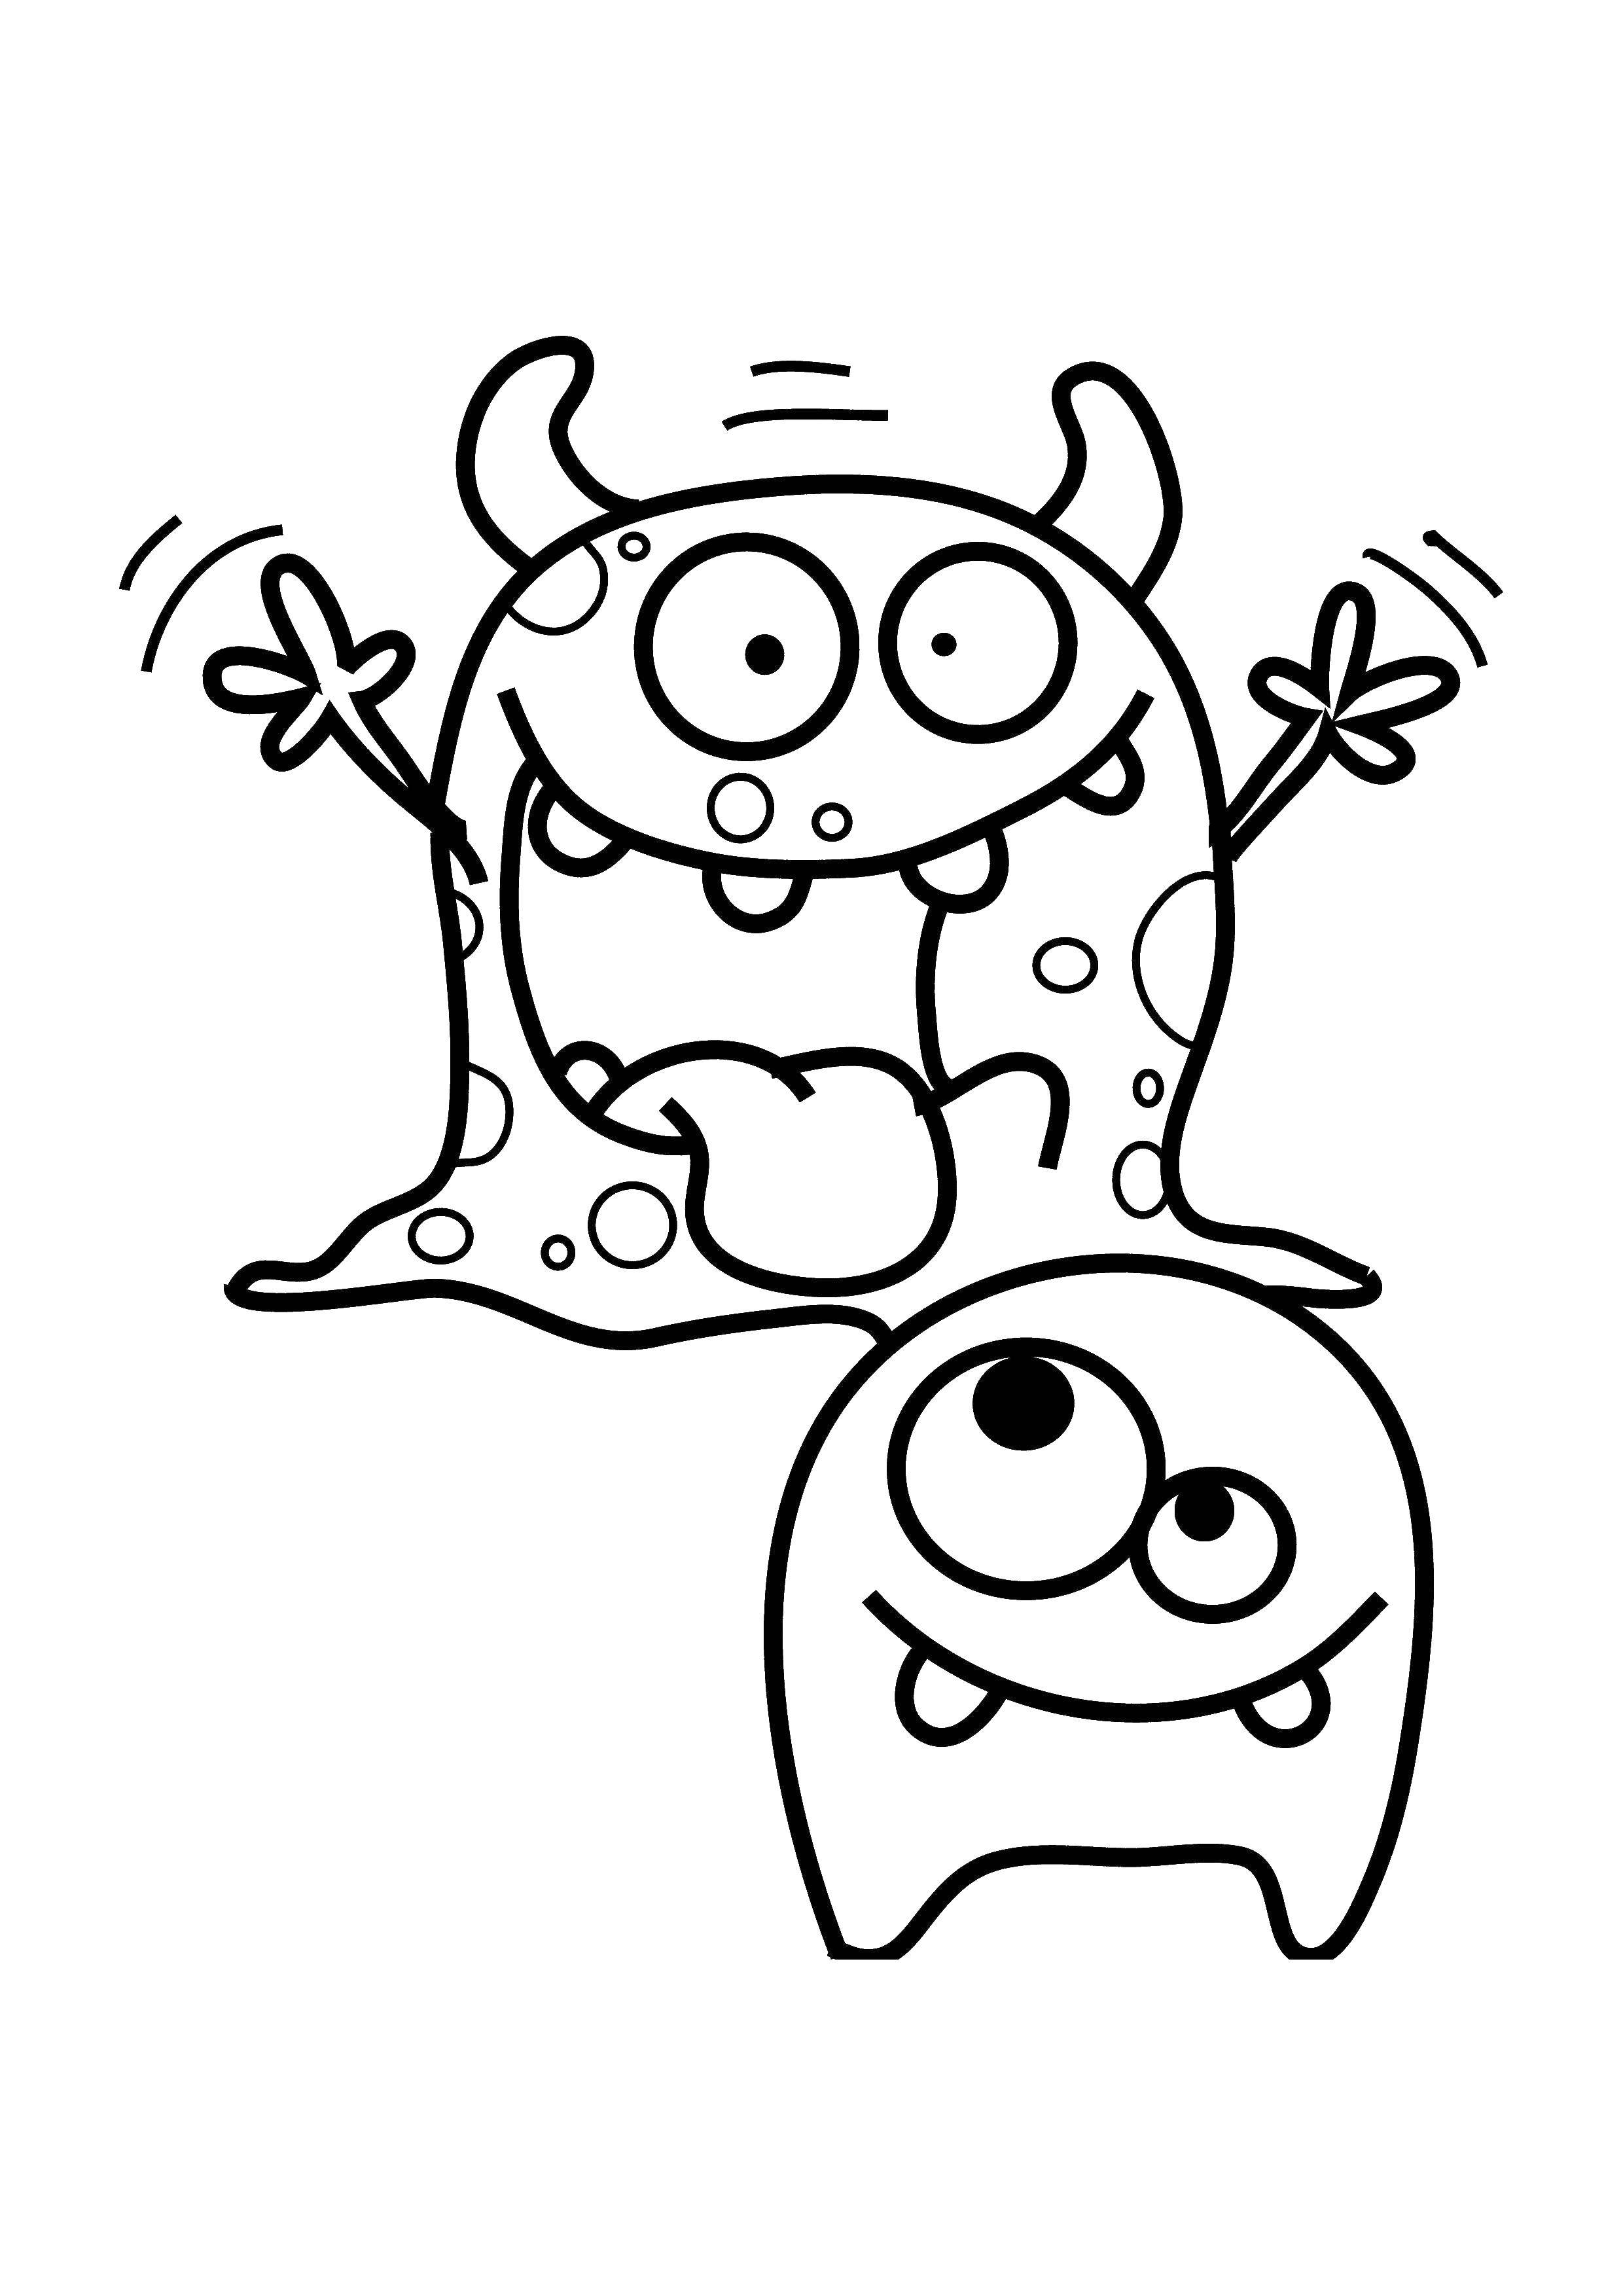 Coloring Monsters. Category Coloring pages monsters. Tags:  Monsters.